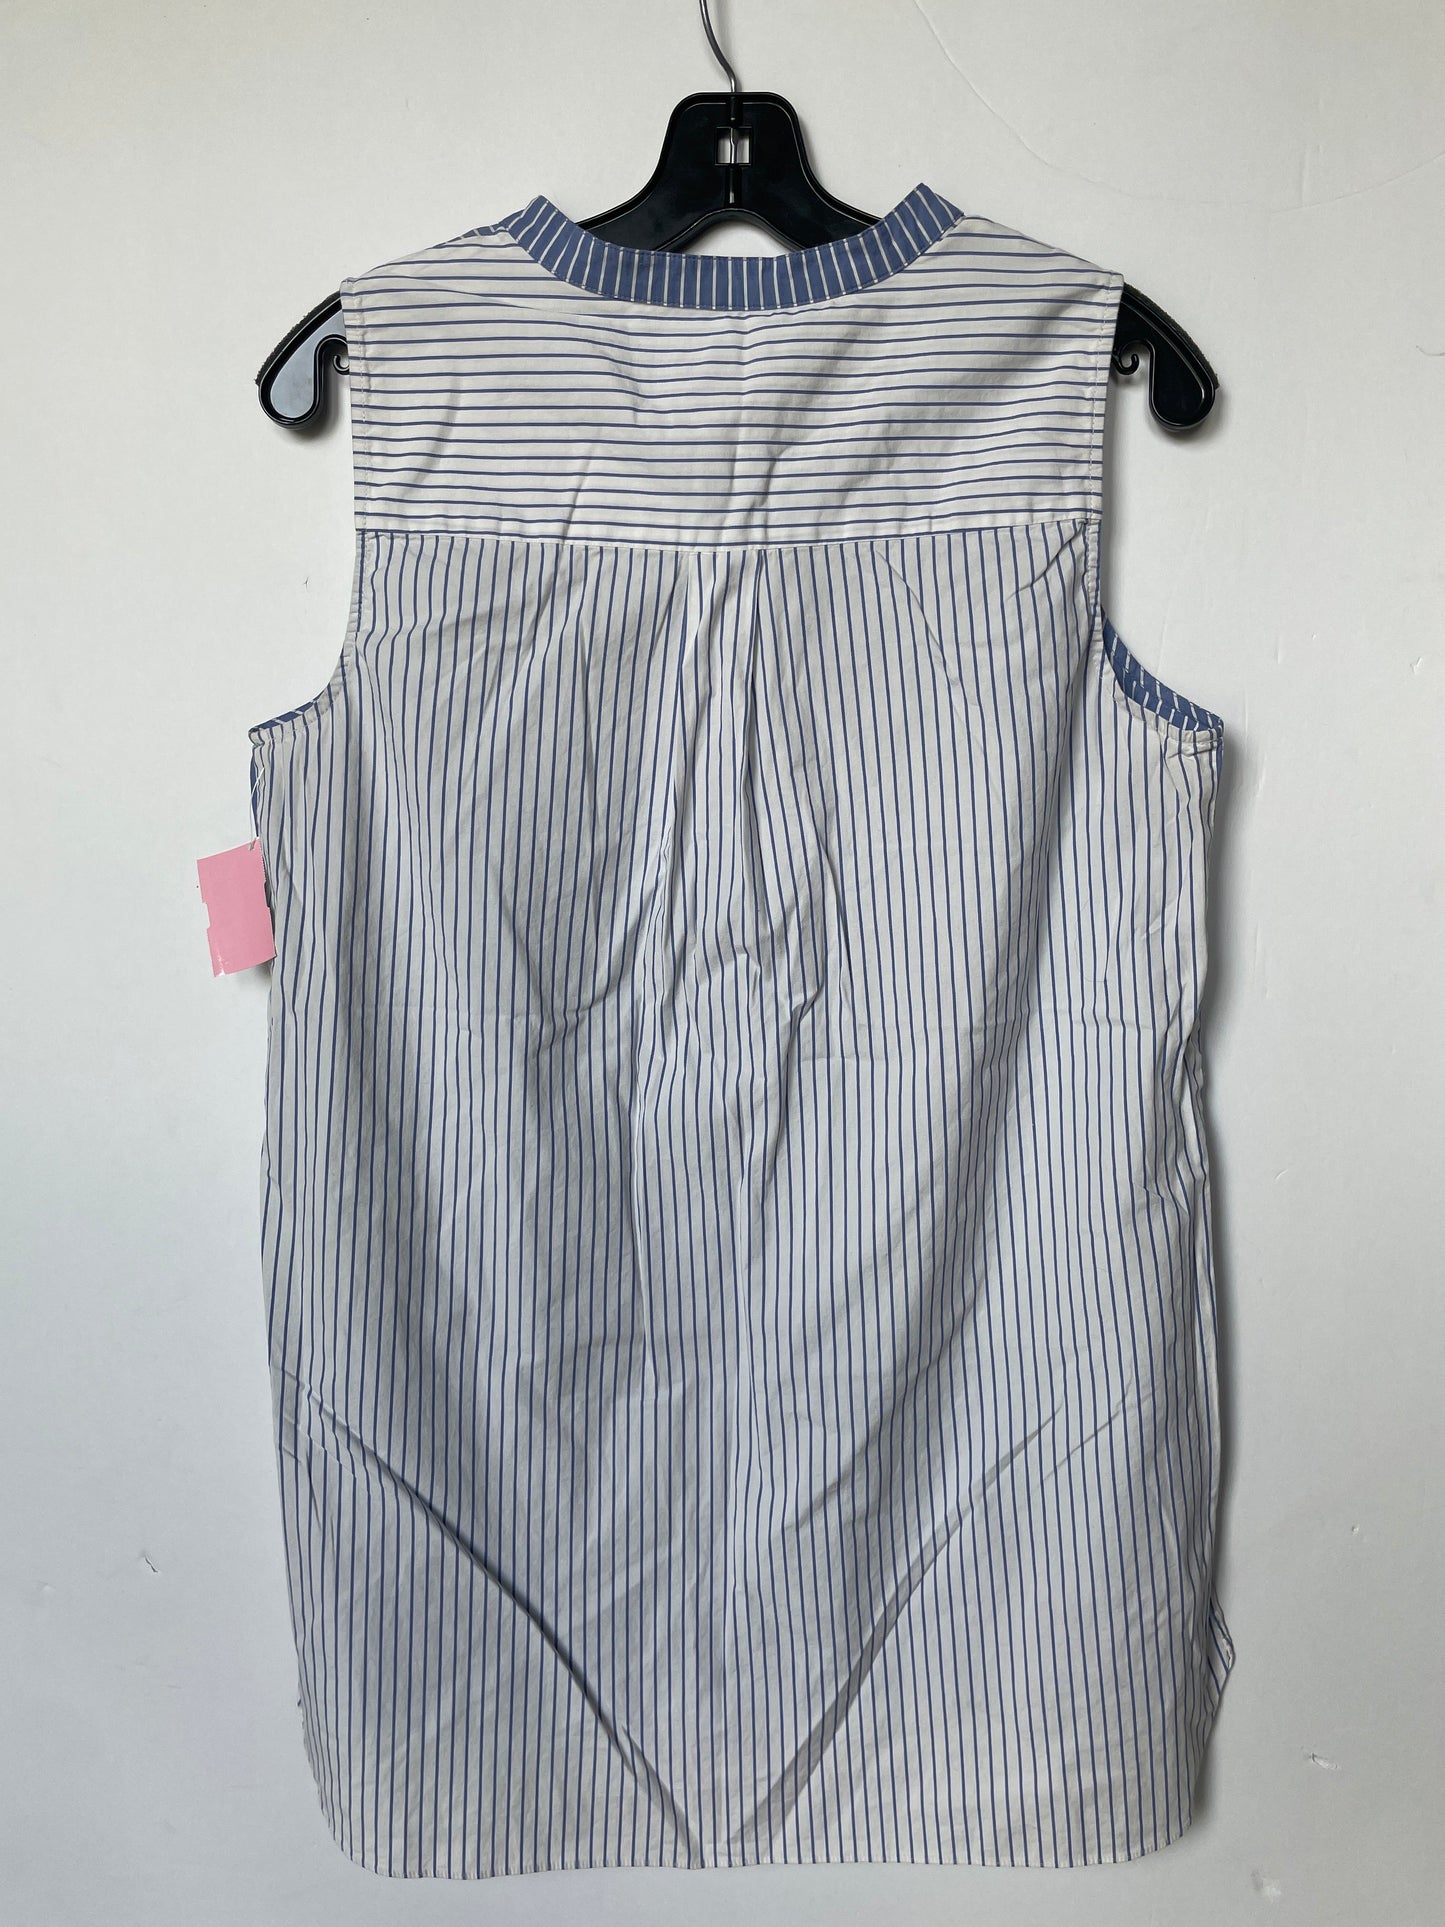 Blue Top Sleeveless Vince Camuto, Size M